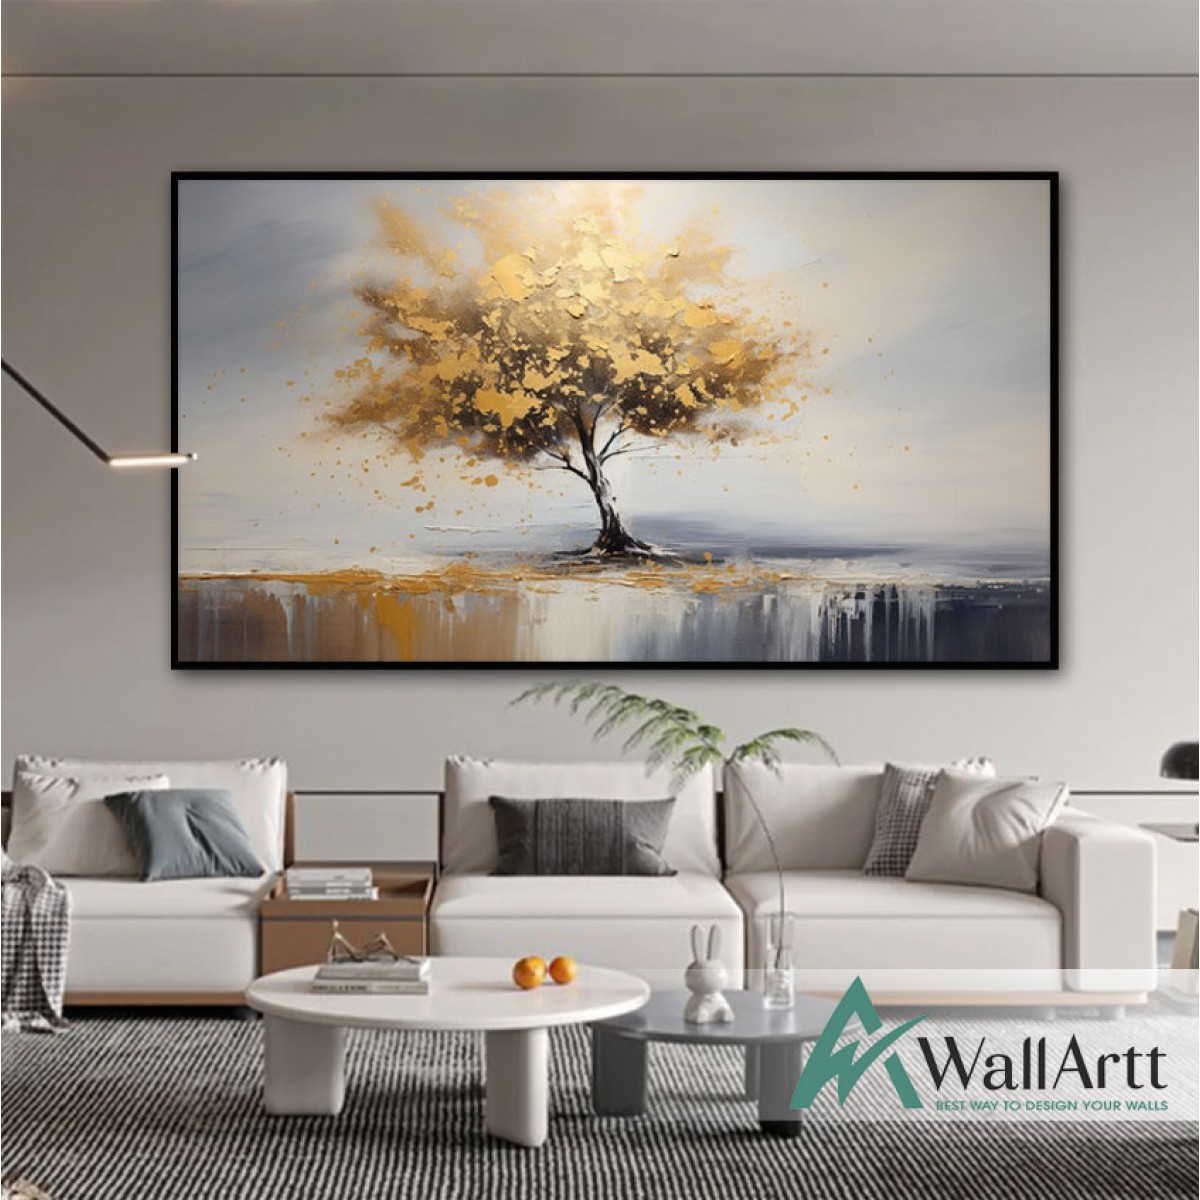 Abstract Gold Tree 3D Heavy Textured Partial oil Painting